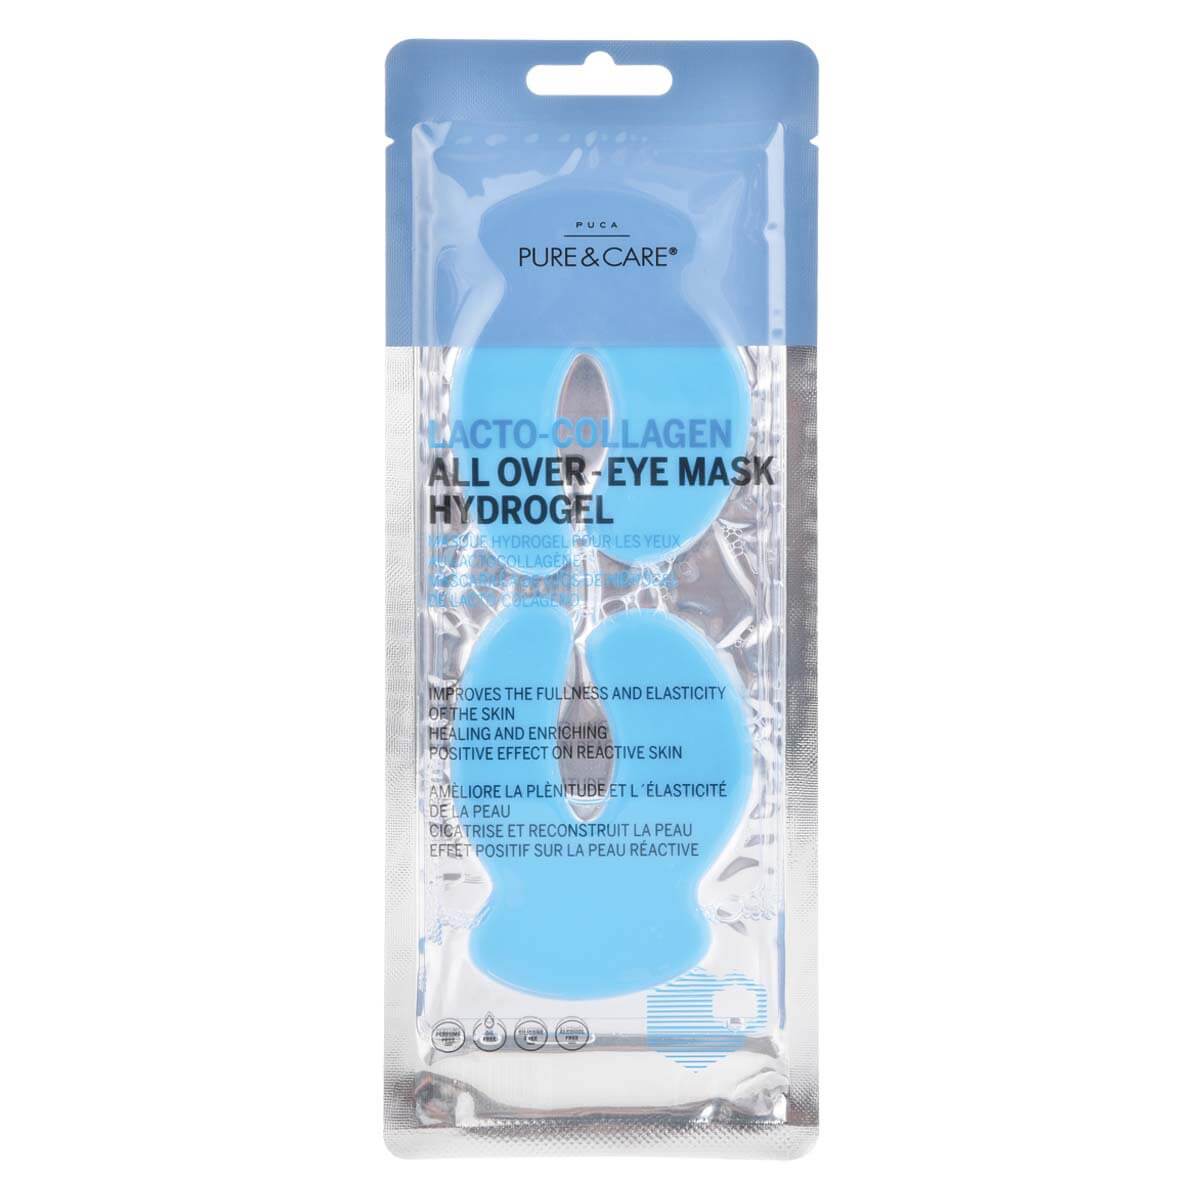 Lacto Collagen All Over Eye Mask Hydrogel | PUCA - PURE & CARE